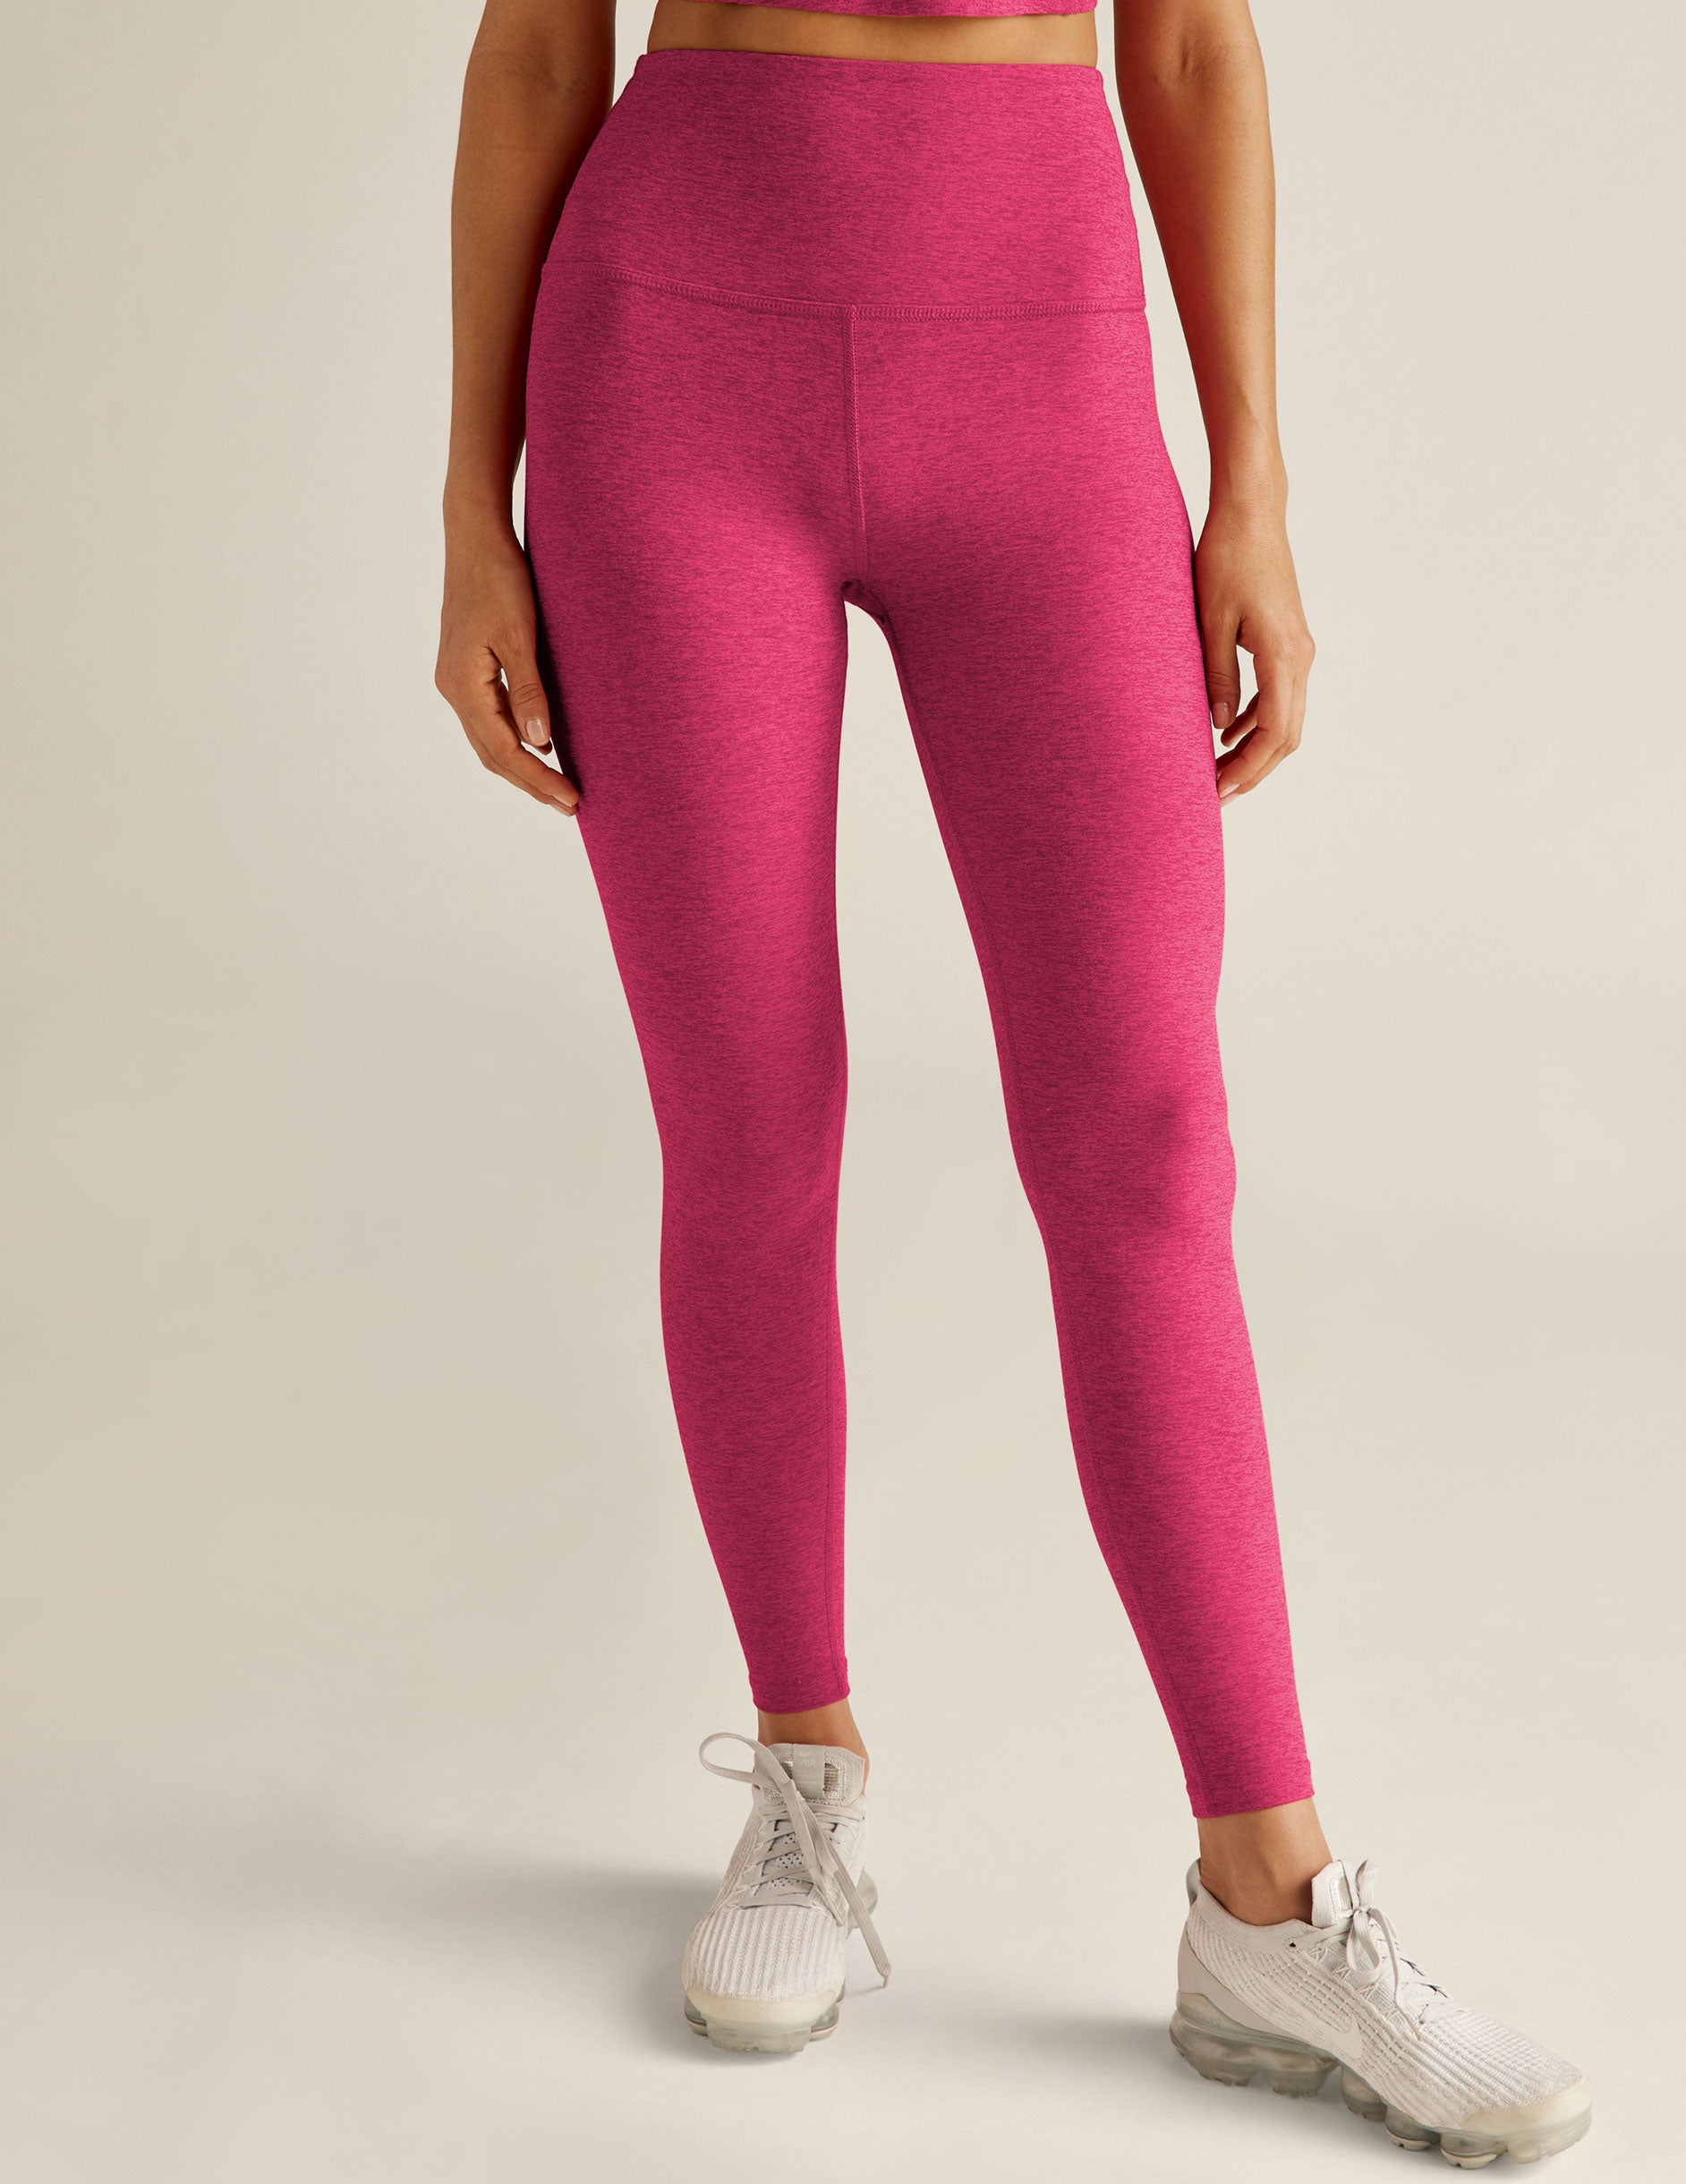 NBW Beyond Yoga Spacedye Caught In The Midi High Waisted Legging, Small